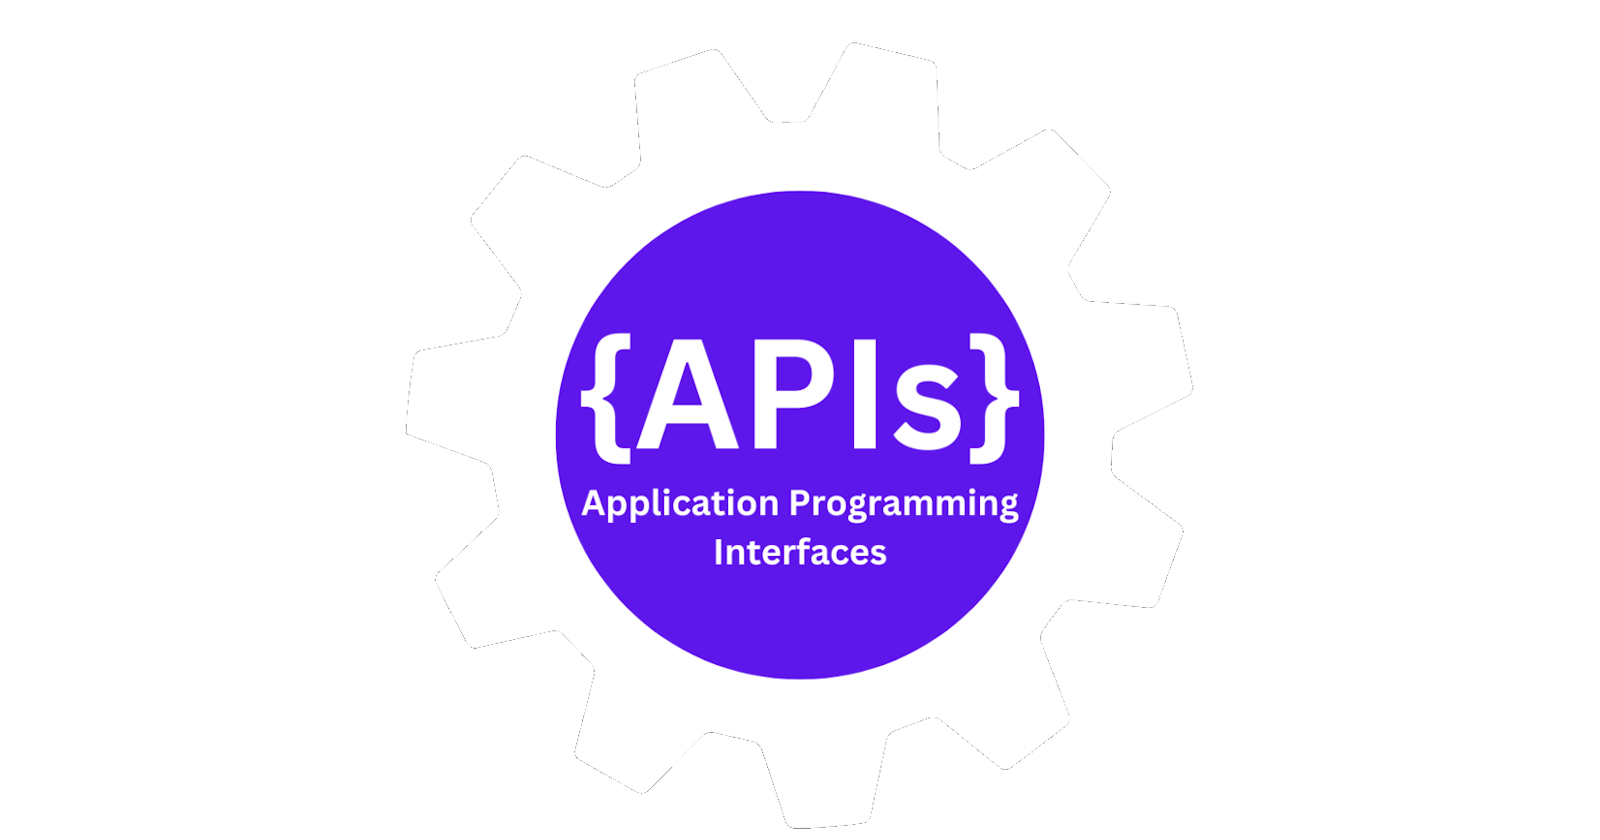 What are APIs?